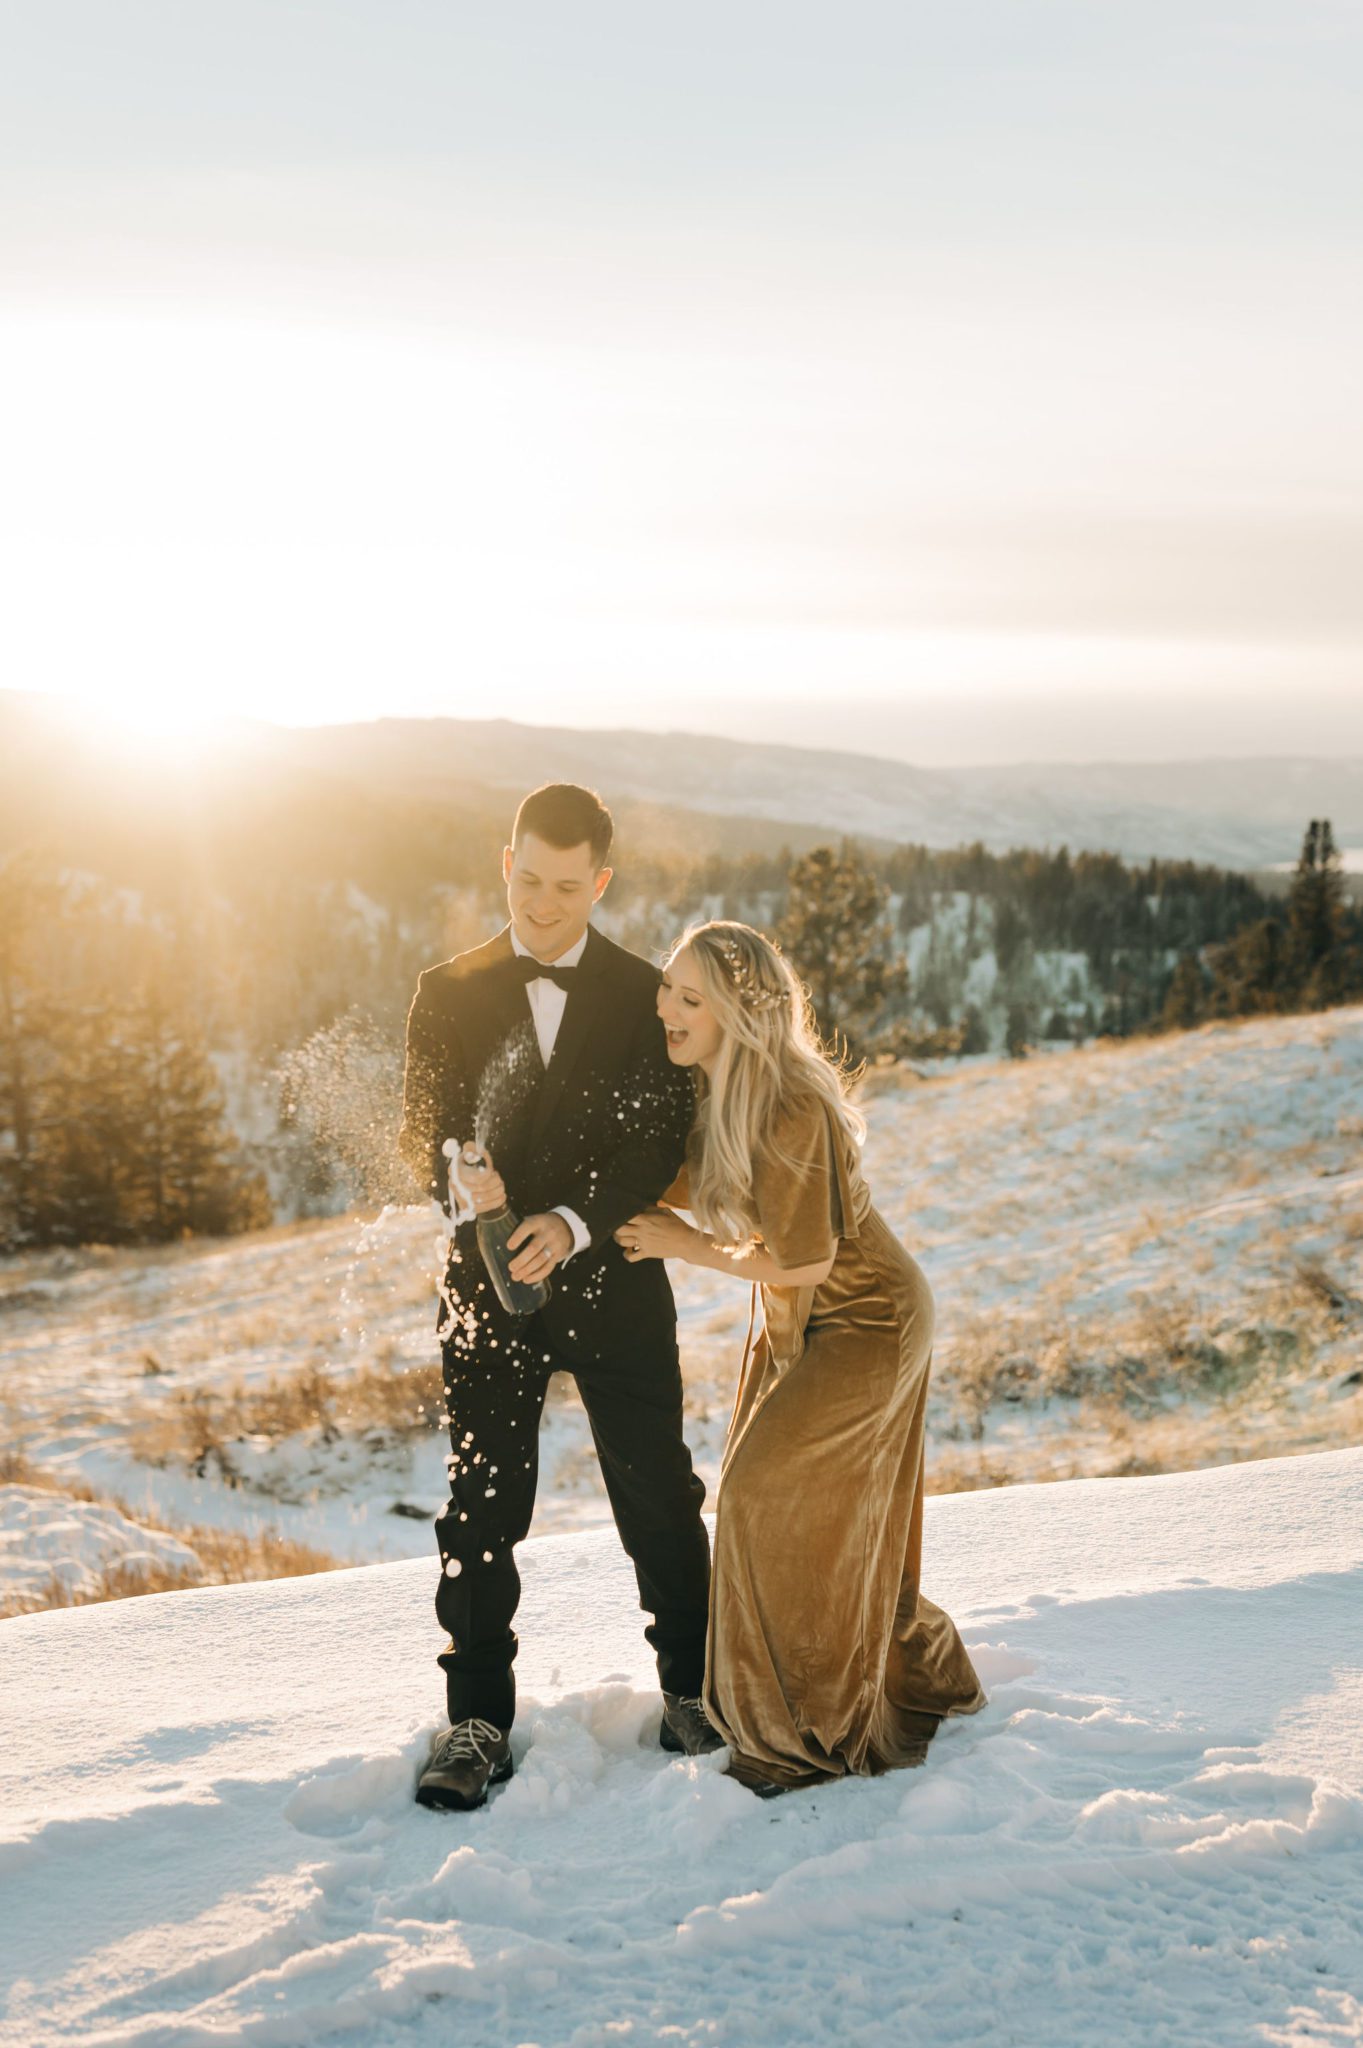 Champagne pop in the snow at outdoor elopement in BC, Winter wedding attire ideas, elopement inspiration